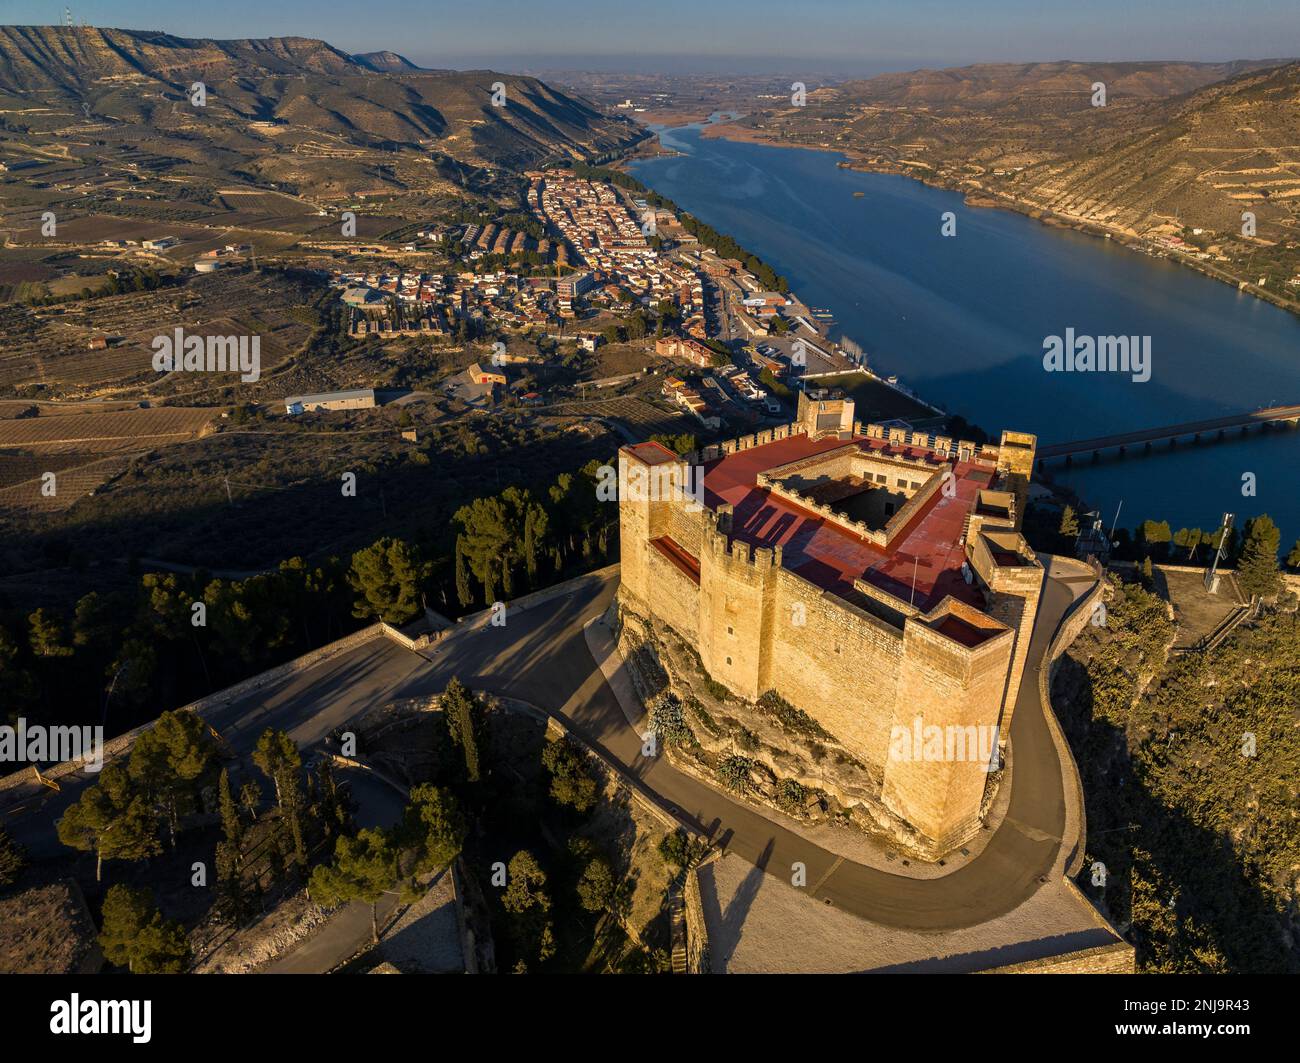 Aerial view of the new town and the castle of Mequinenza on the banks of the Segre river (Bajo Cinca, Zaragoza, Aragon, Spain) Stock Photo